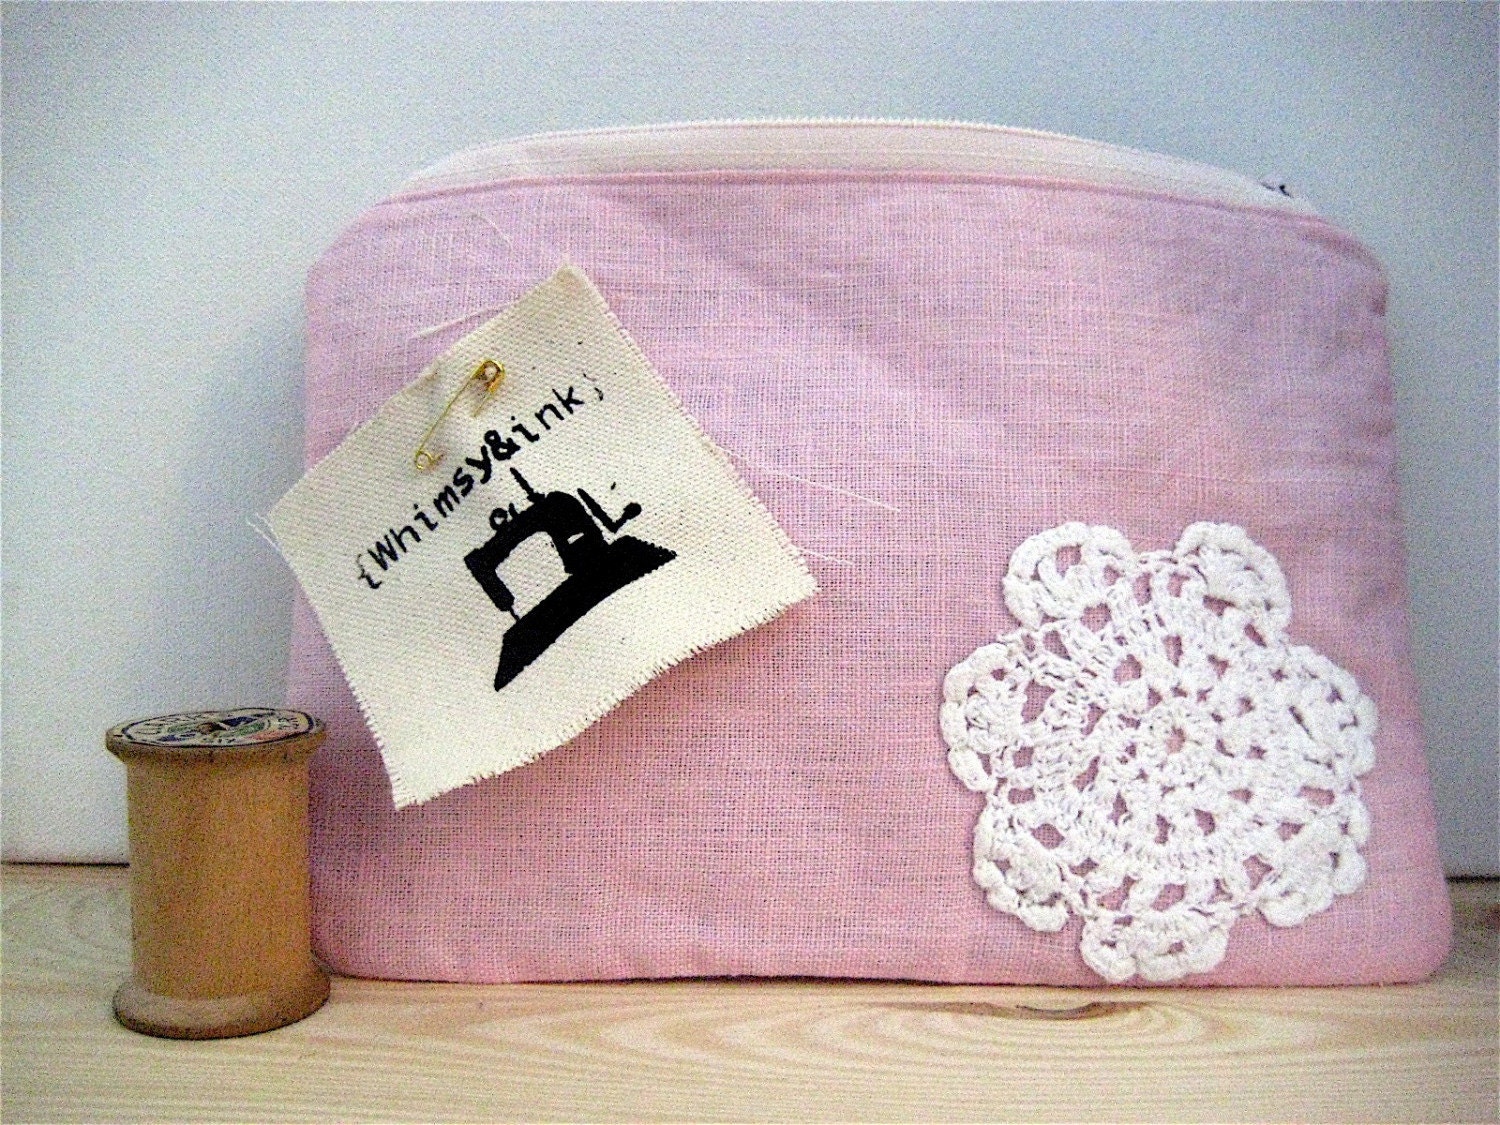 Pretty Pink Linen Zippered Pouch with Vintage Doily Handstitched Applique